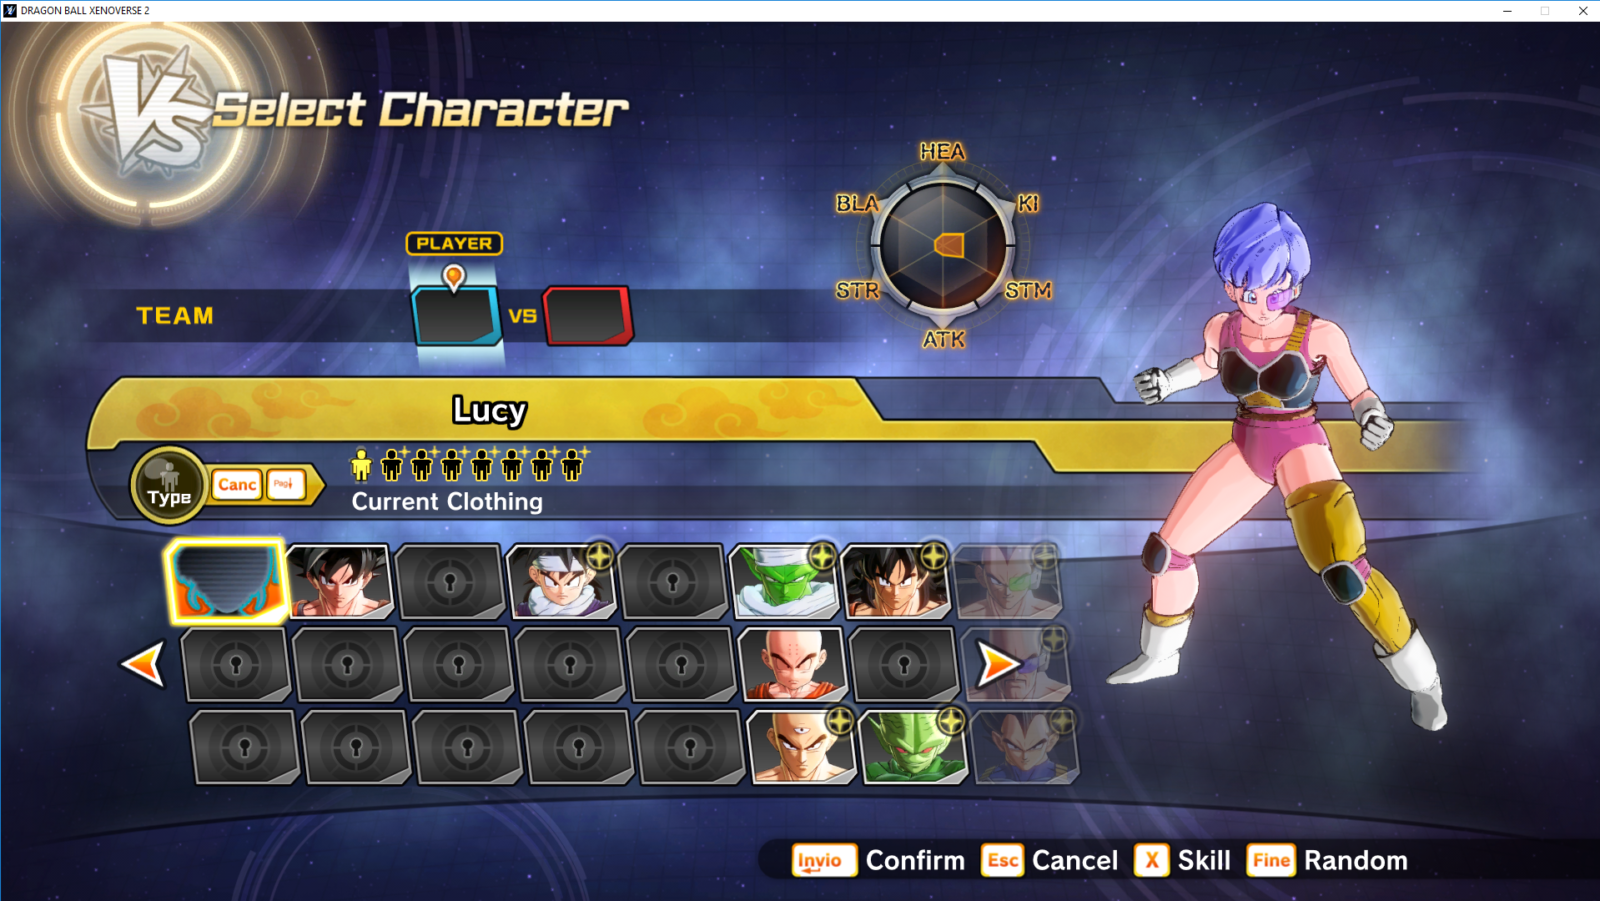 All characters and stages unlocked from the beginning – Xenoverse Mods